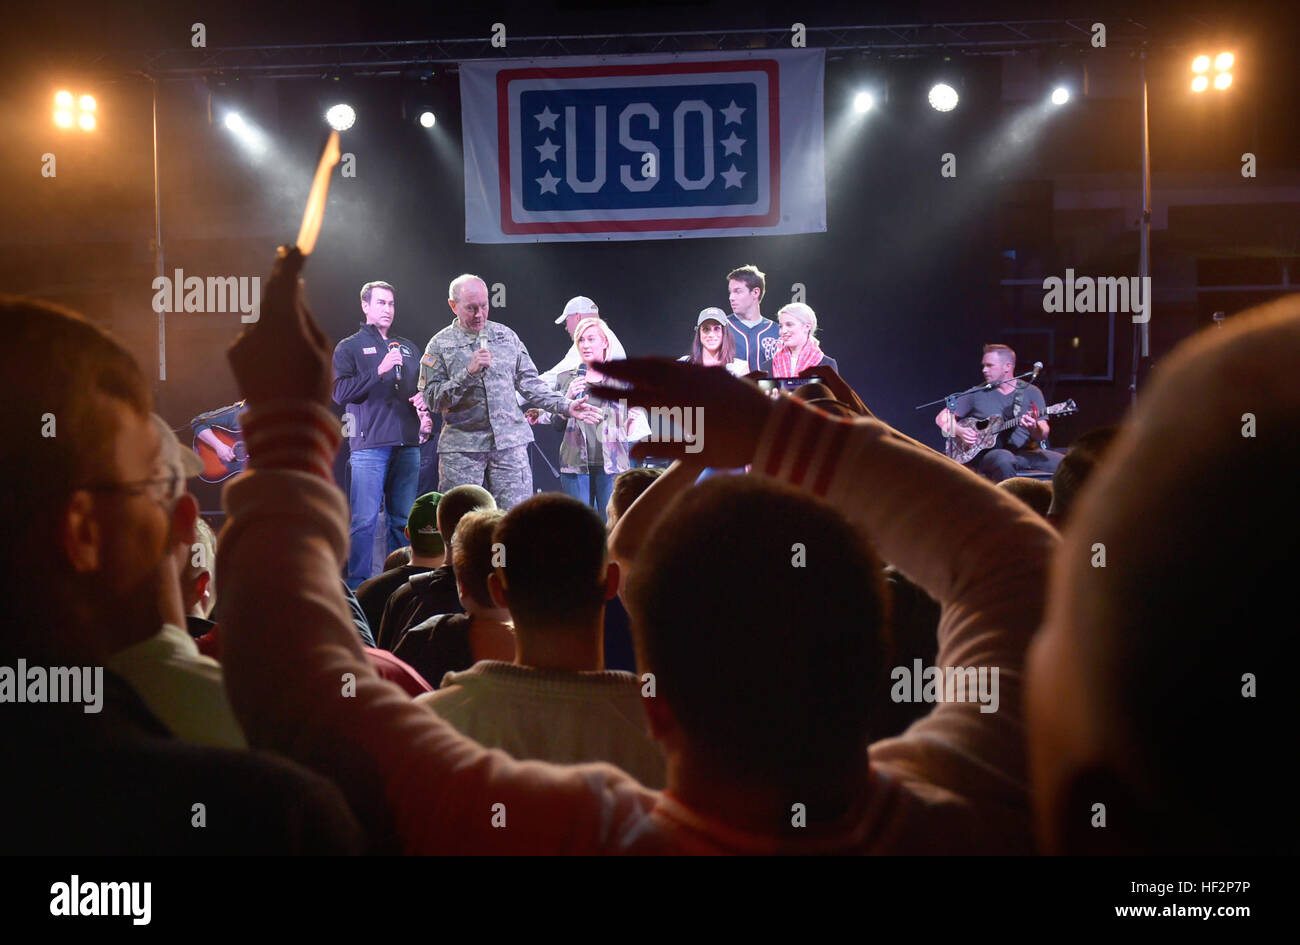 Chairman of the Joint Chiefs of Staff Gen. Martin E. Dempsey, country music artist Kellie Pickler, retired Chicago Bear middle linebacker Brian Urlacher, actress Dianna Agron, Gen Martin Dempsey, comedian Rob Riggle, actress Meghan Markle and Washington Nationals pitcher finish a USO show in Vicenza, Italy, Dec. 7, 2014. (DOD photo by D. Myles Cullen/Released) 2014 CJCS Holiday USO Tour 141207-D-VO565-110 Stock Photo